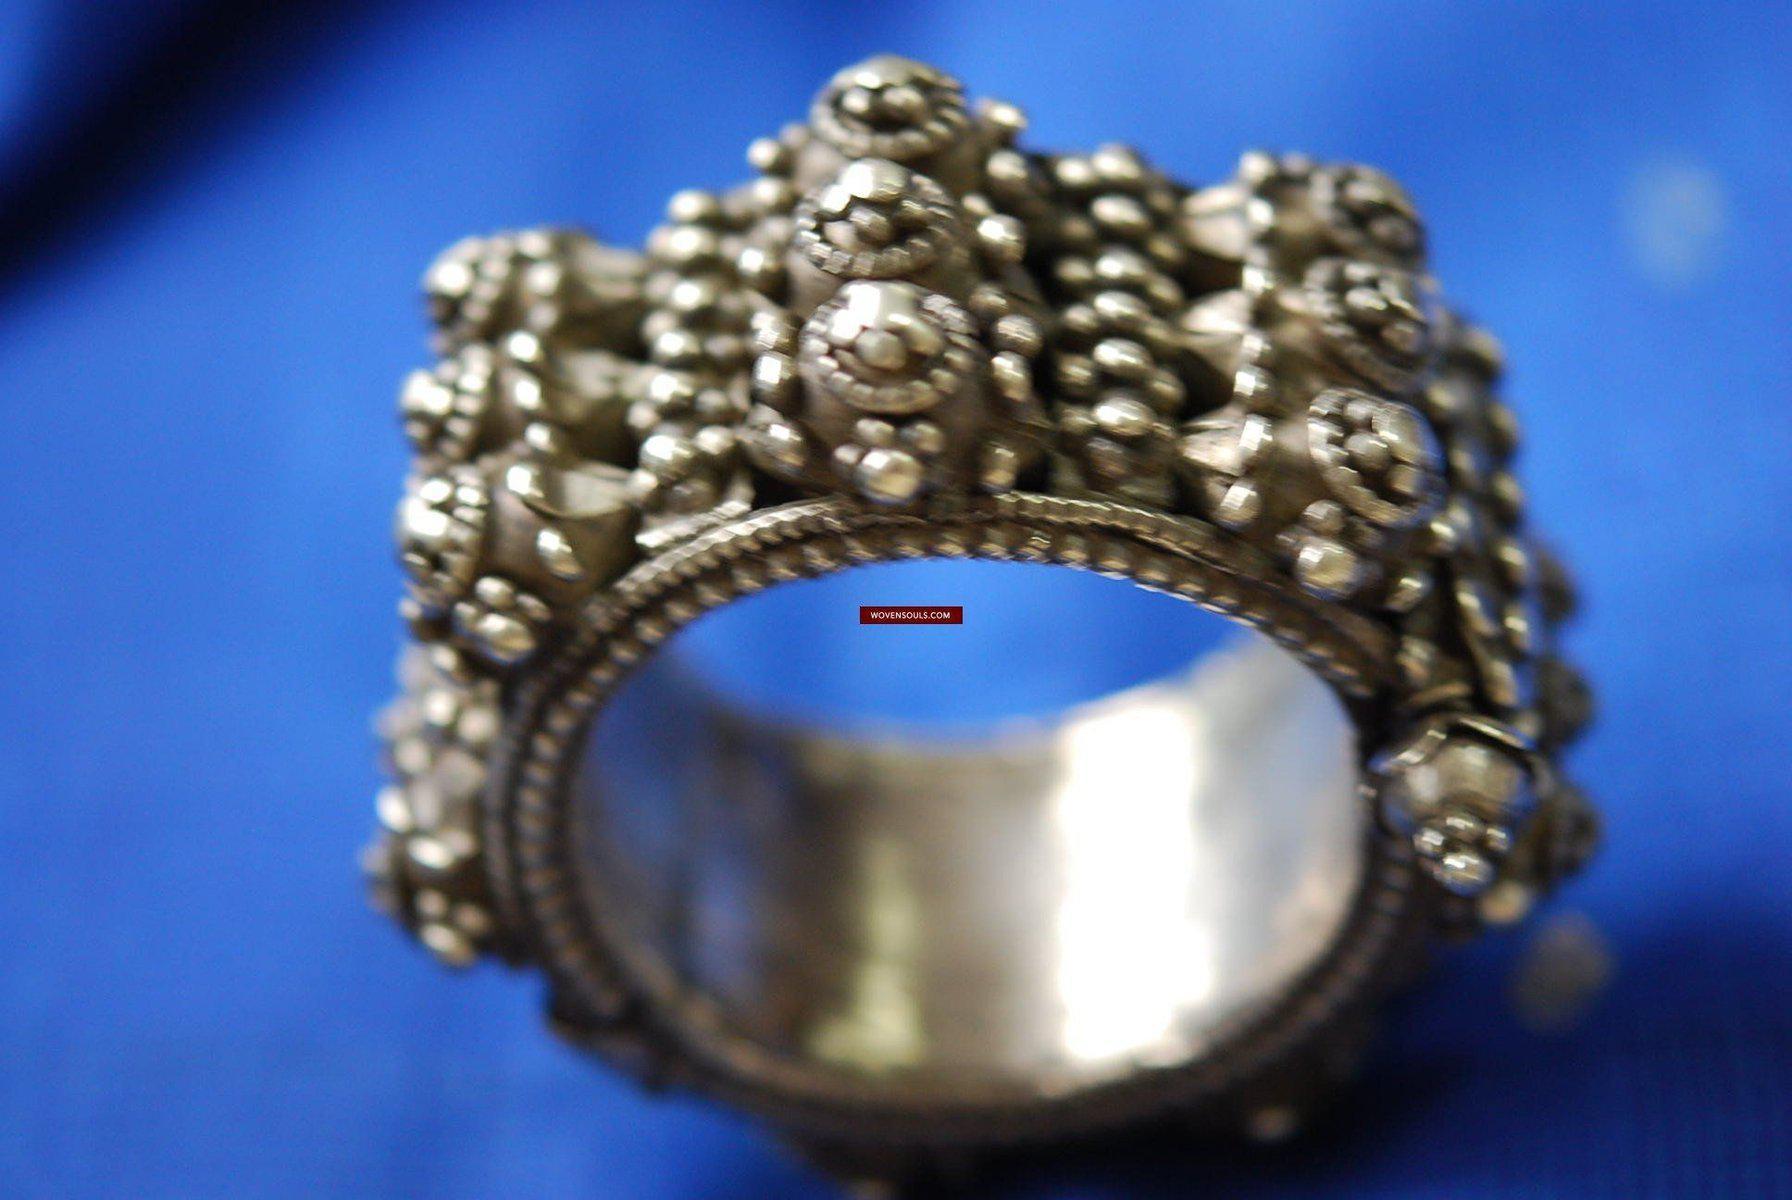 328 Old Indian Silver Wrist Cuff Jewelry Ornament  Antique Art   WOVENSOULS Antique Textiles  Art Gallery